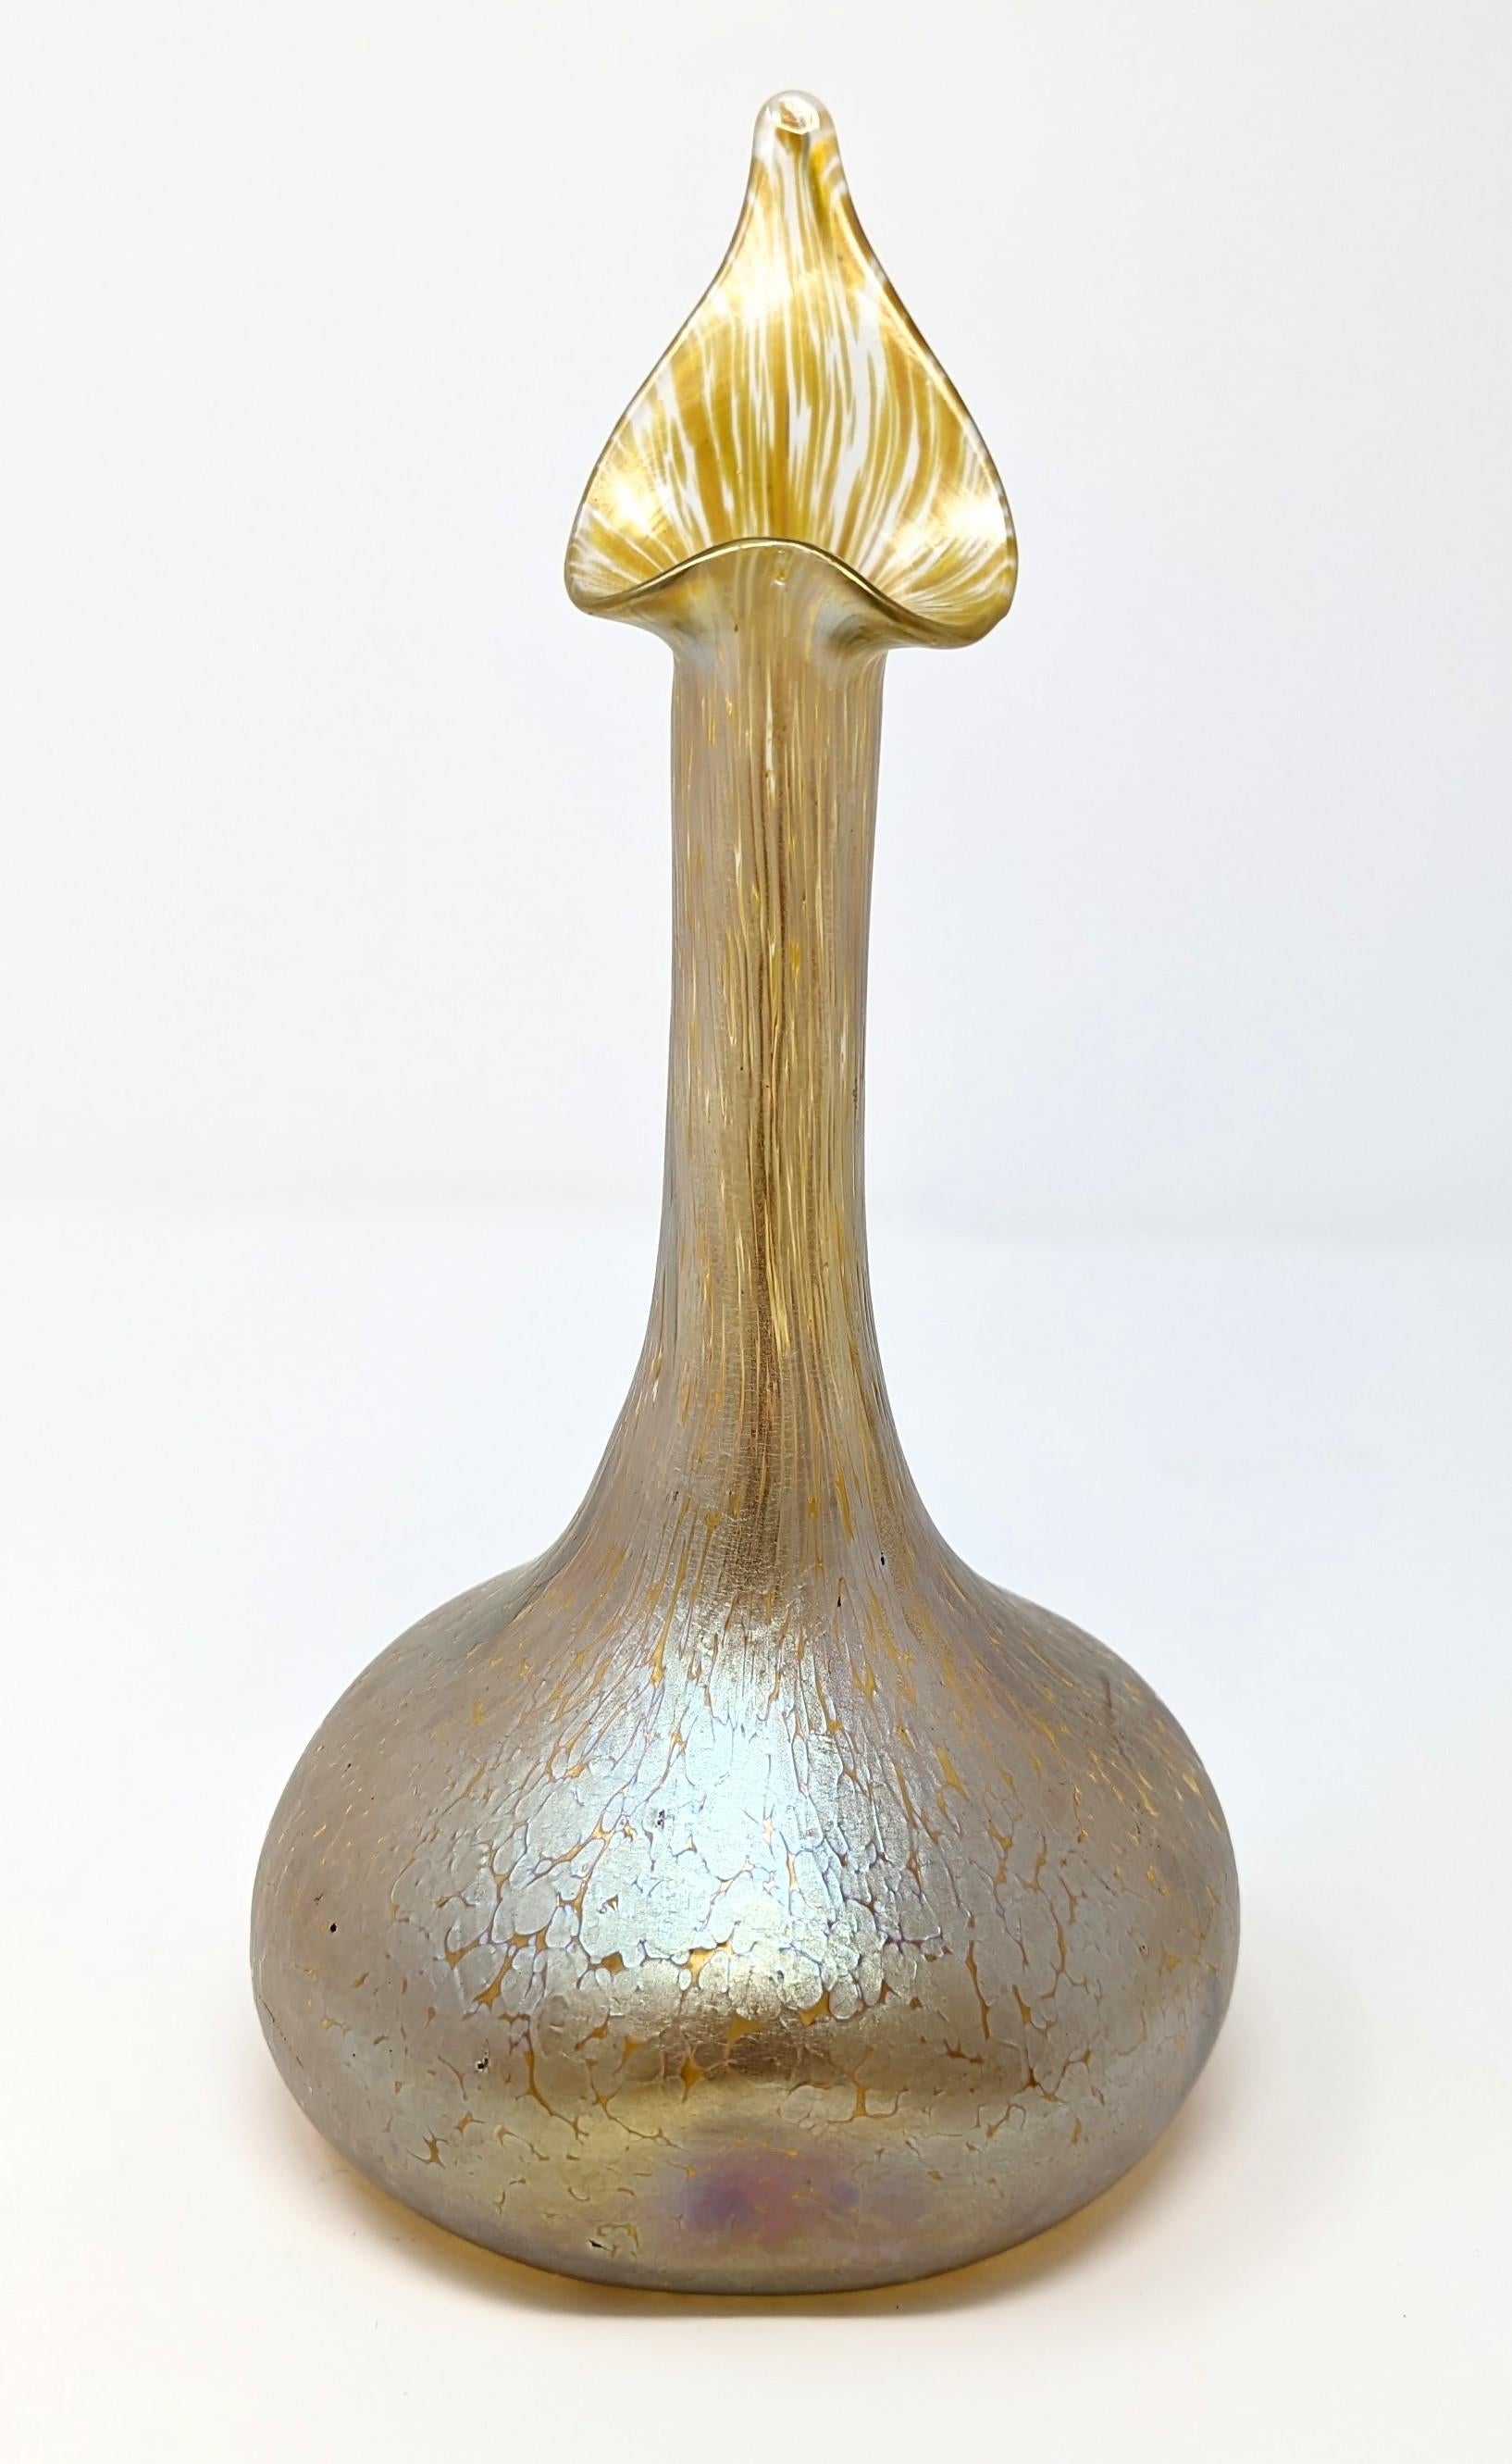 Antique Glass Vase Candia Papillon Loetz Witwe Bohemia Circa 1898 Art Nouveau In Good Condition For Sale In Greer, SC